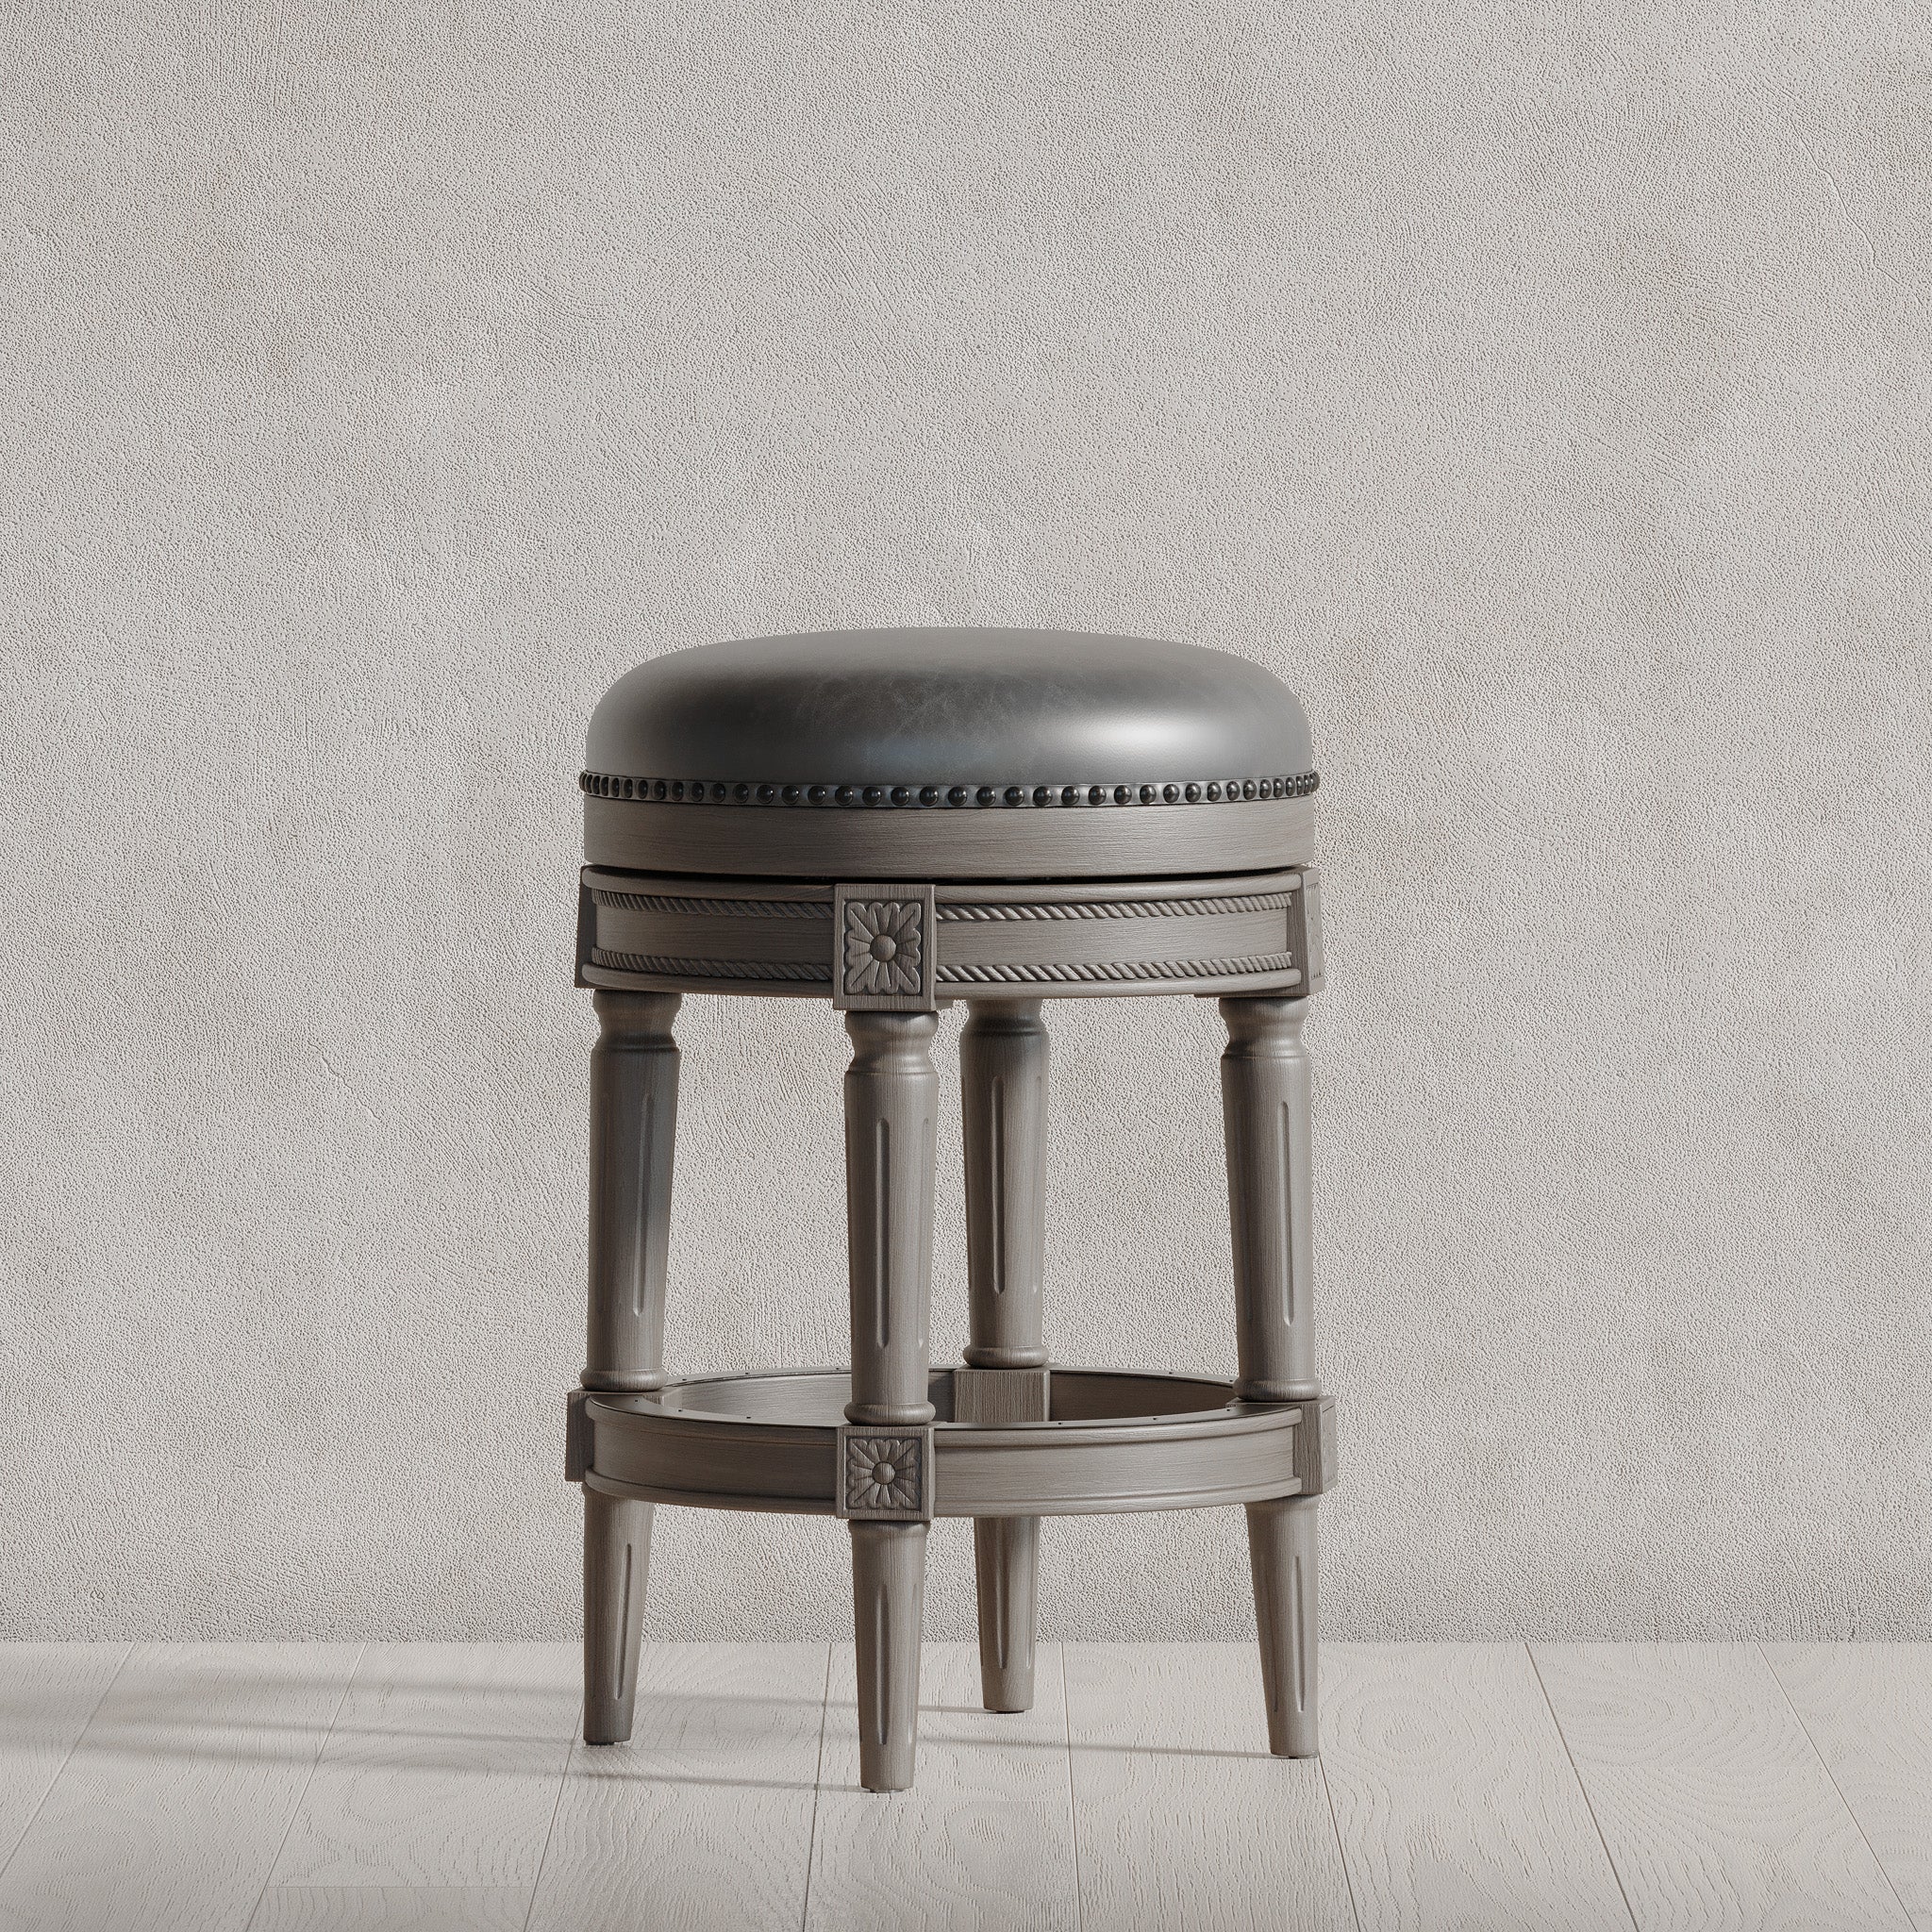 Pullman Backless Counter Stool in Reclaimed Oak Finish with Ronan Stone Vegan Leather in Stools by Maven Lane